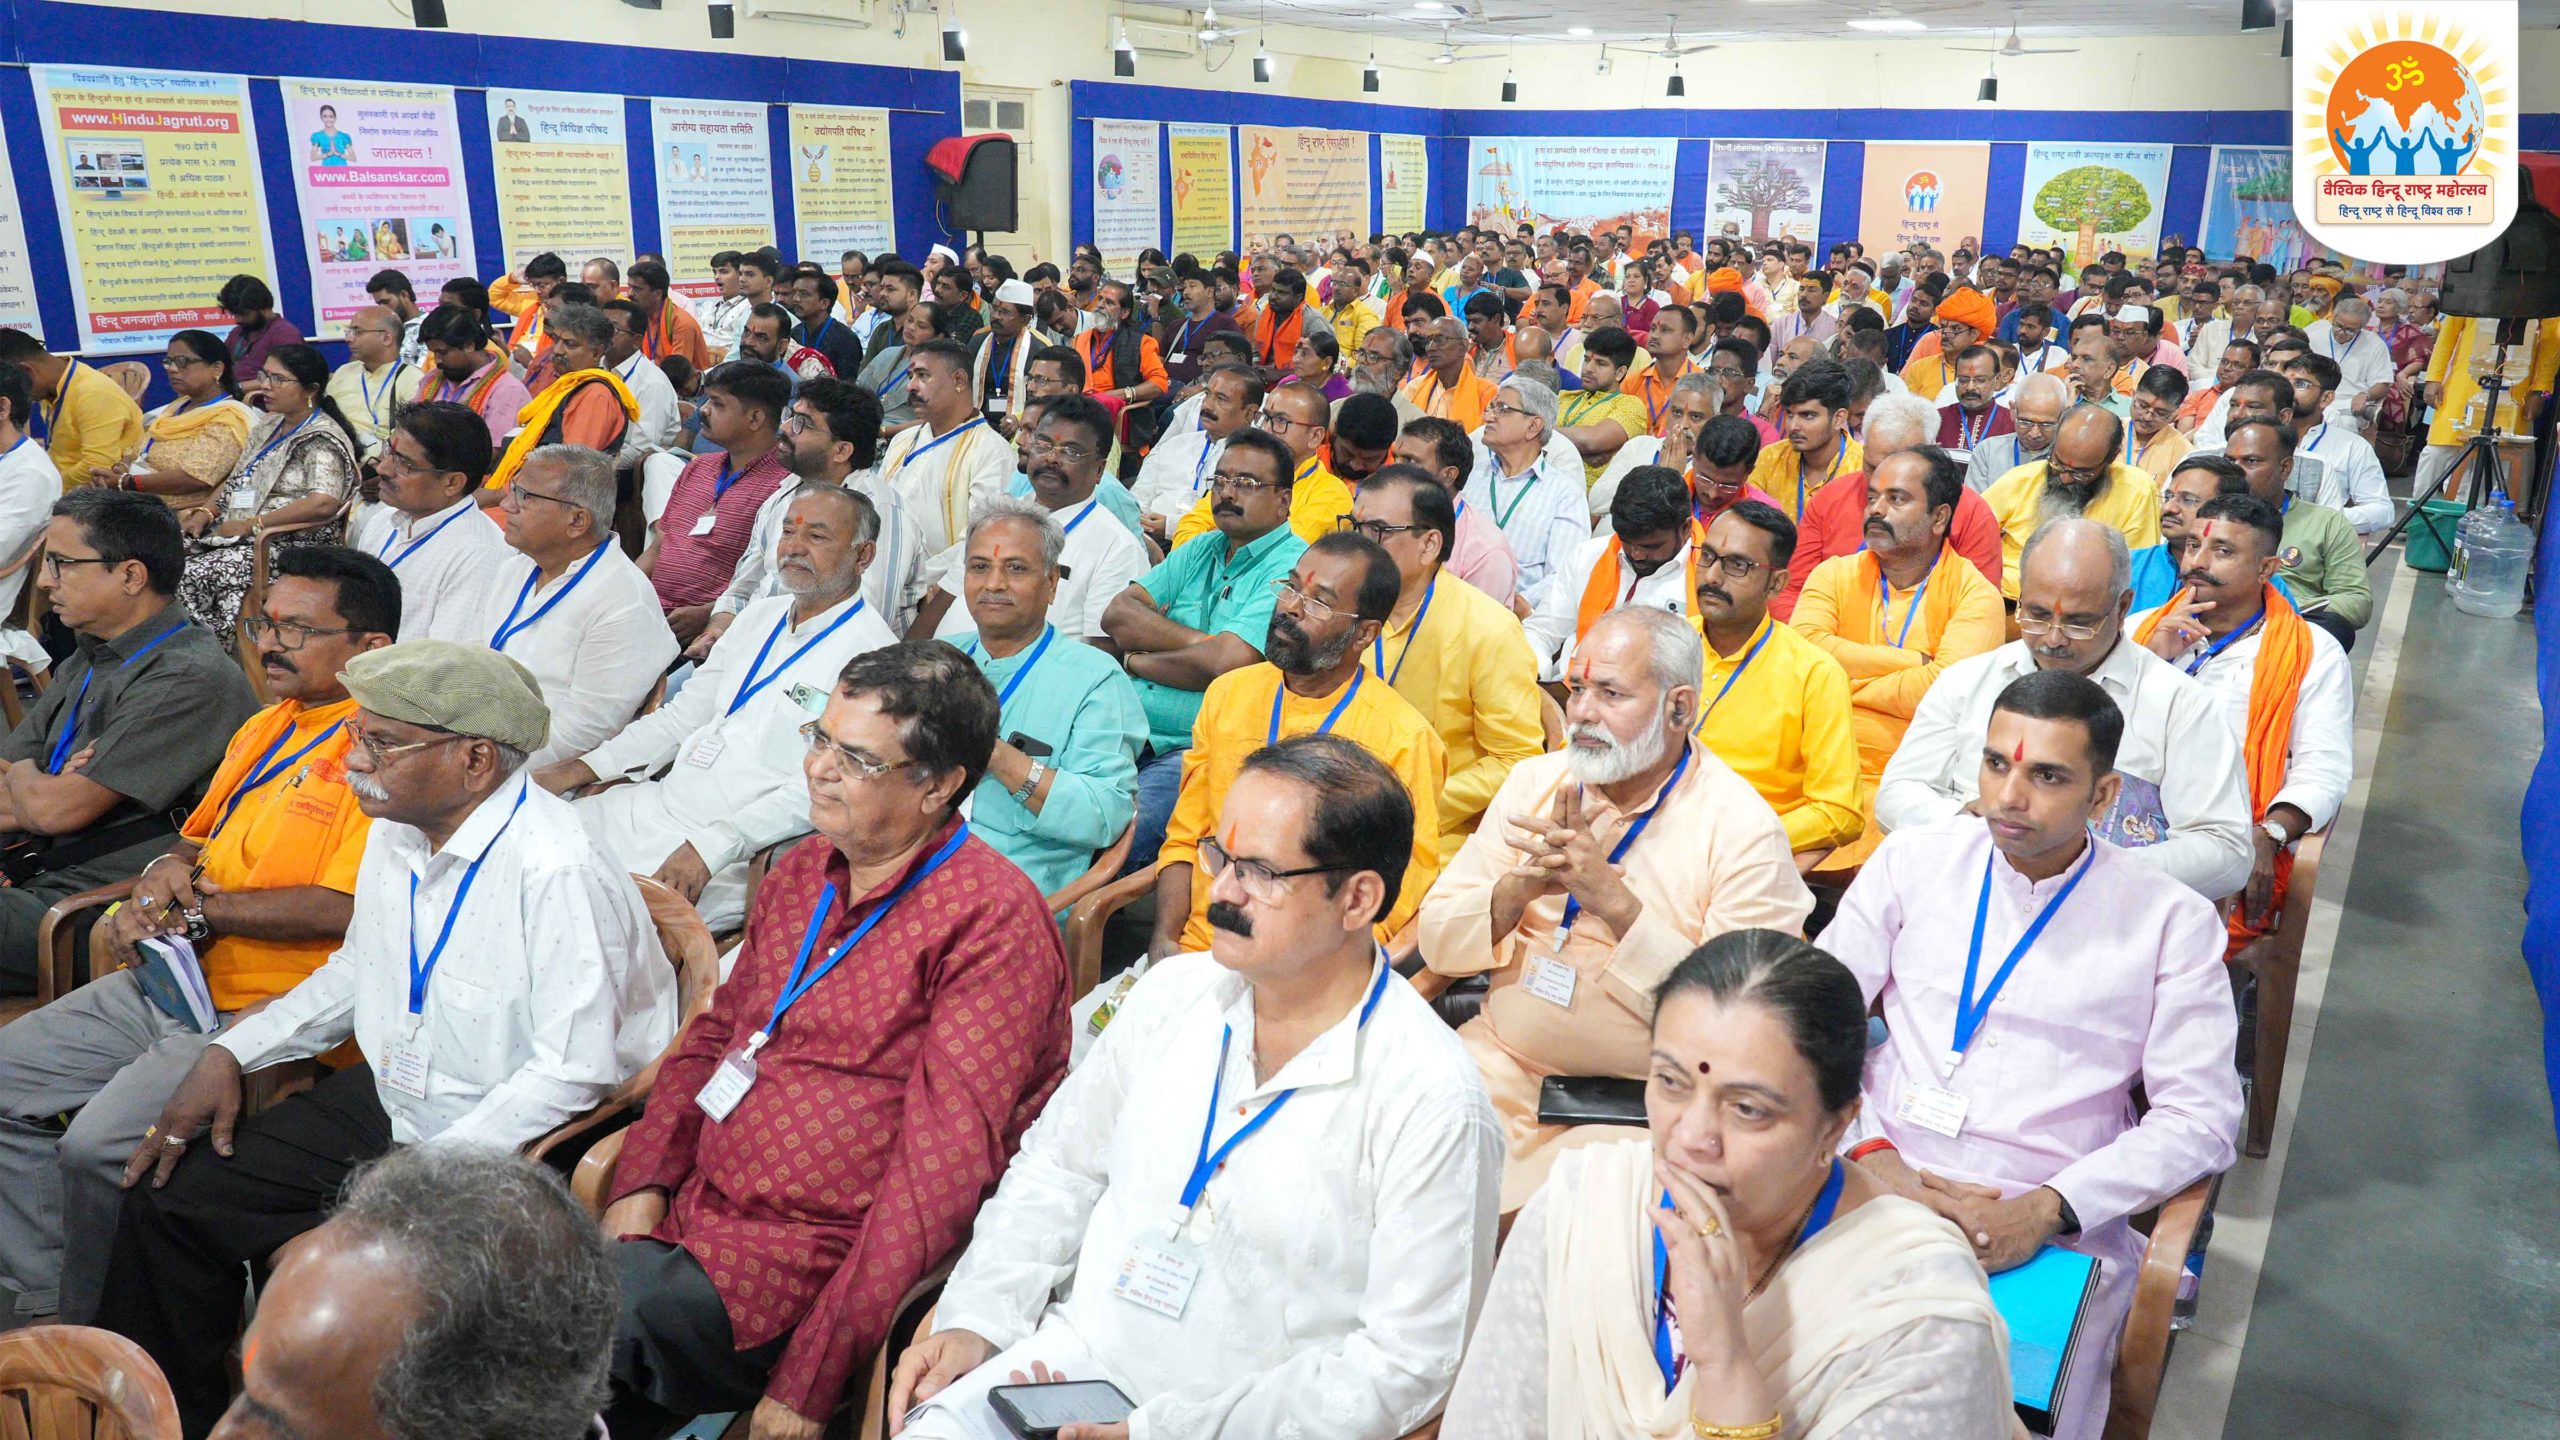 Devout Hindus intently listening to the thoughtful and inspirational speeches by the honourable dignitaries